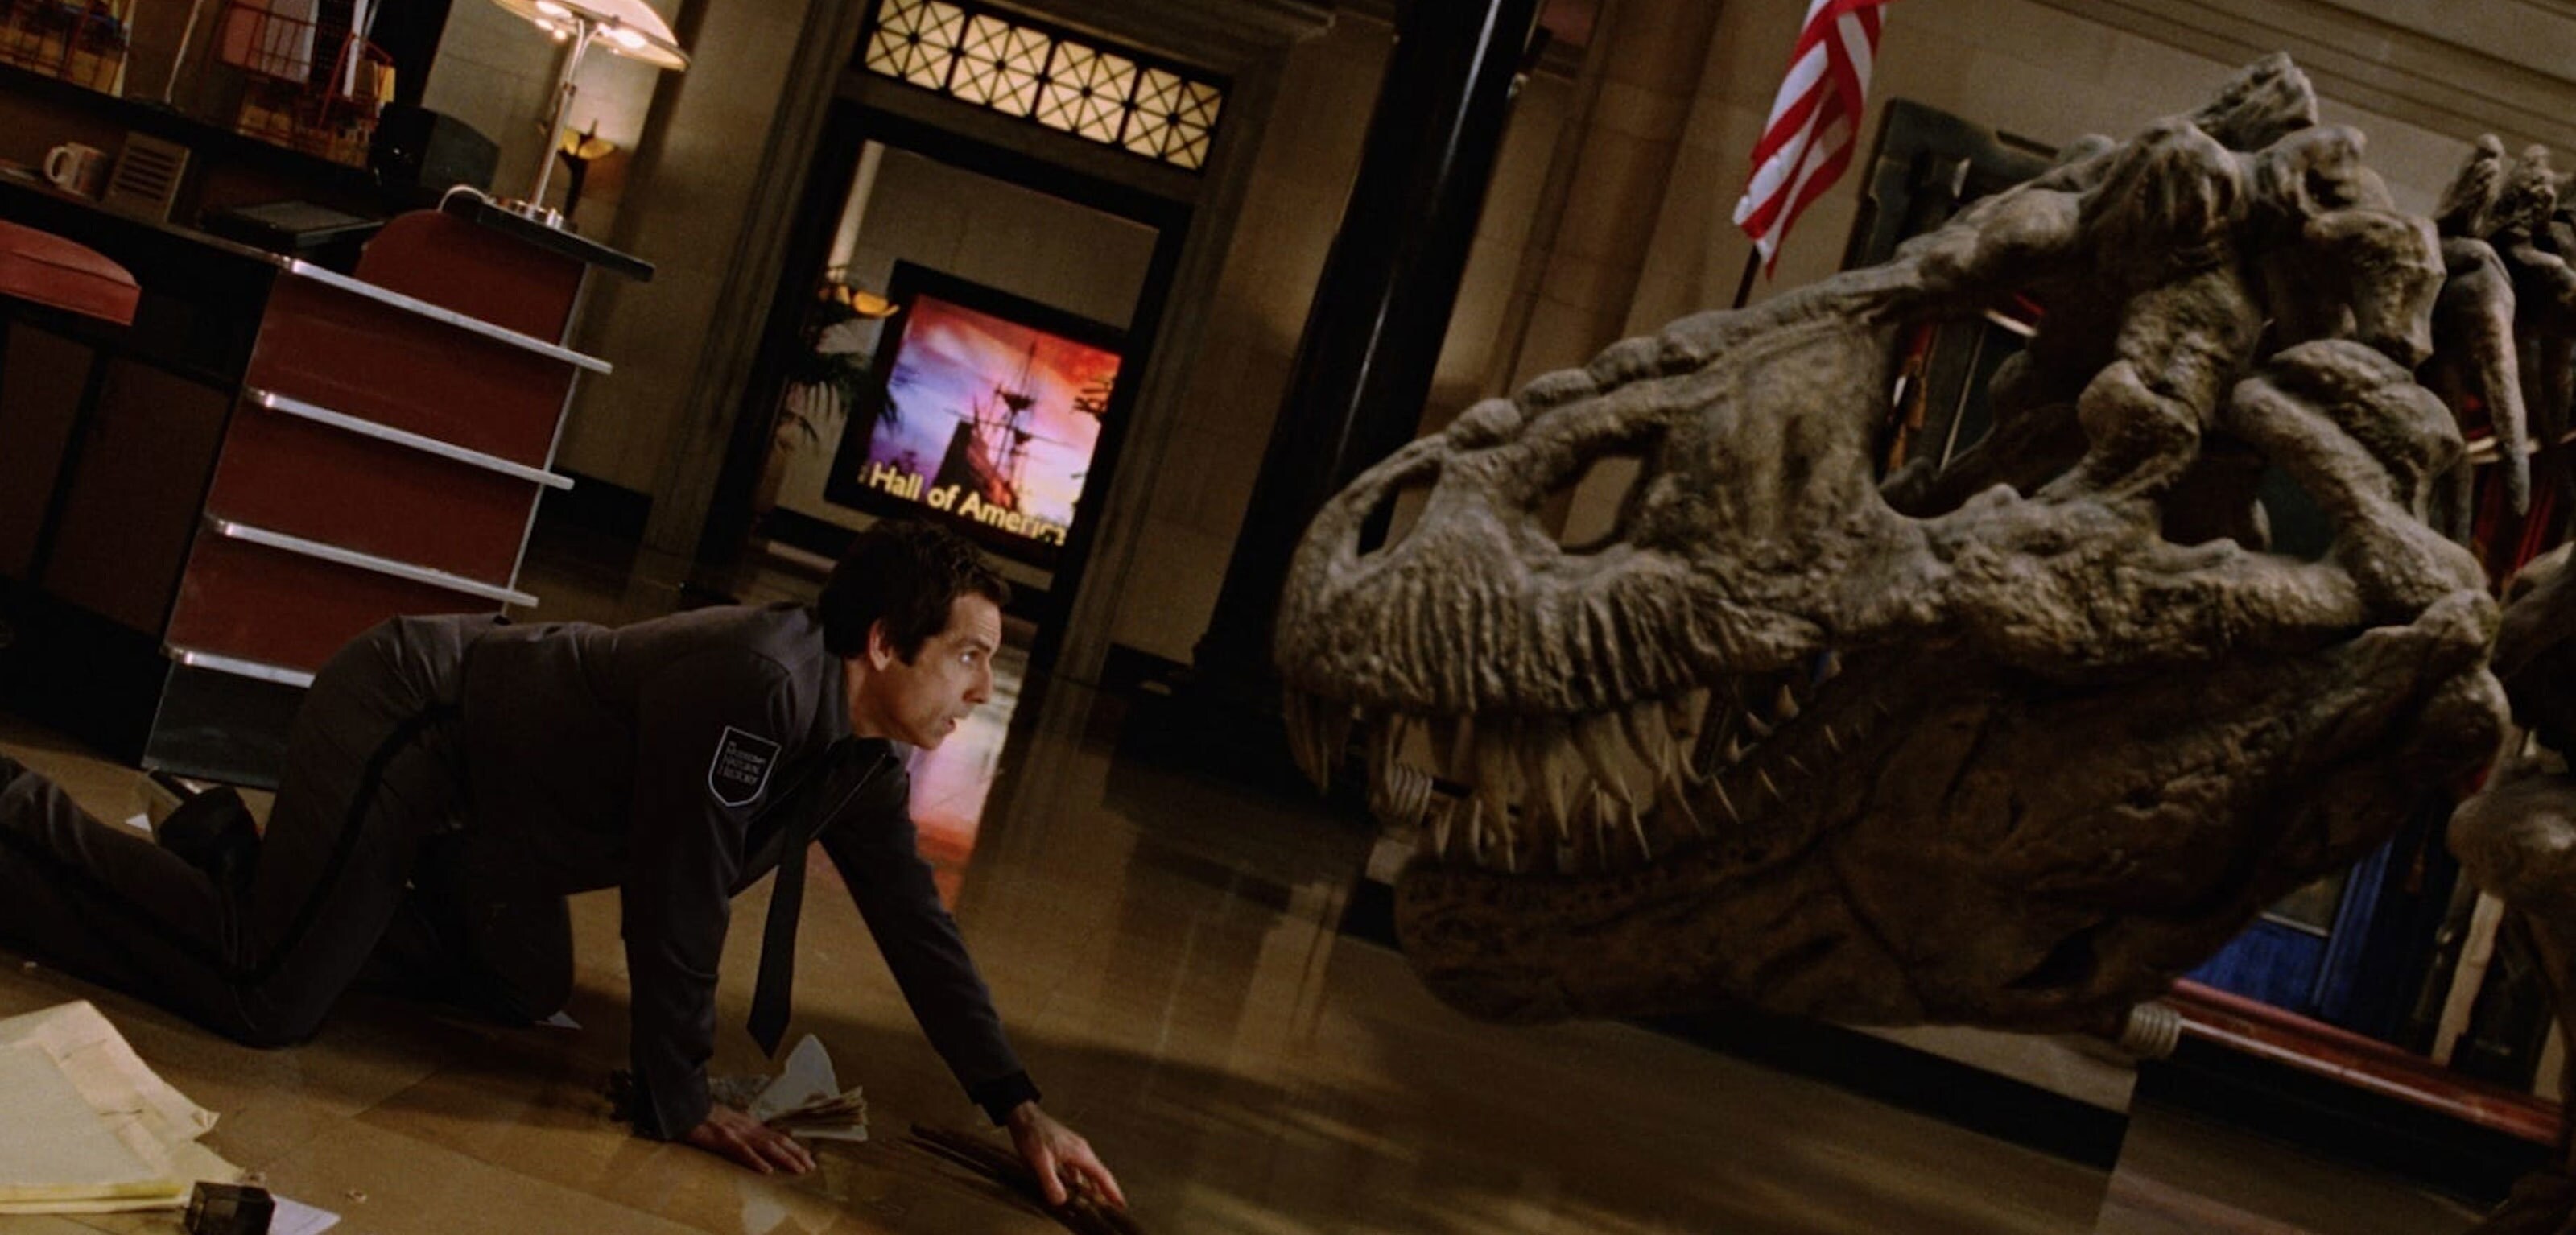 A still image from Night at the museum